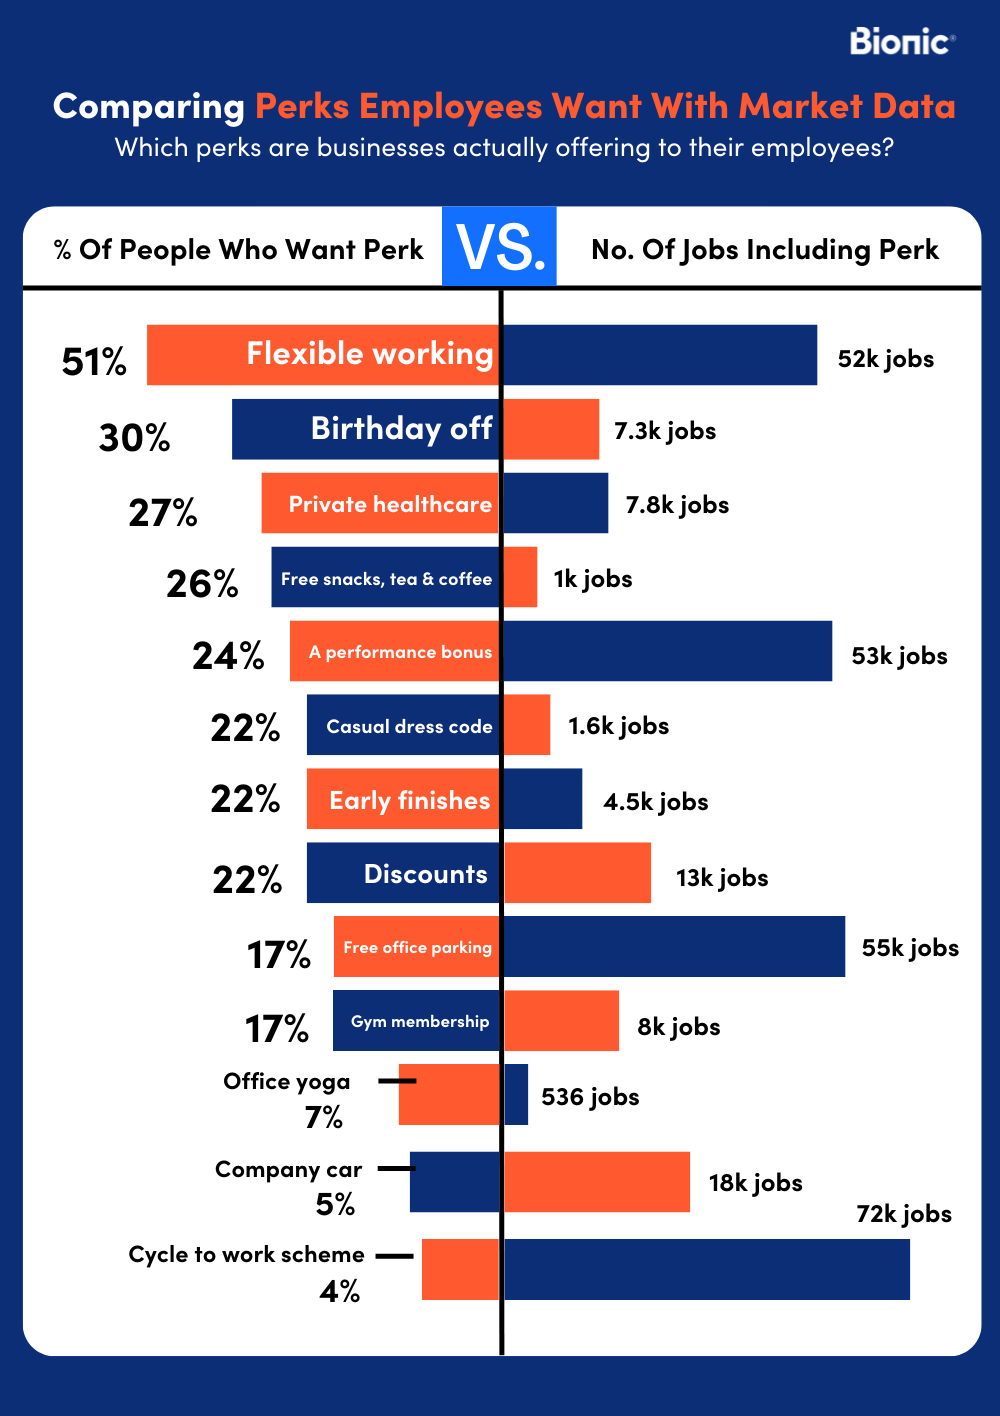 Graph showing the most popular job perks against those perks actually offered by employers